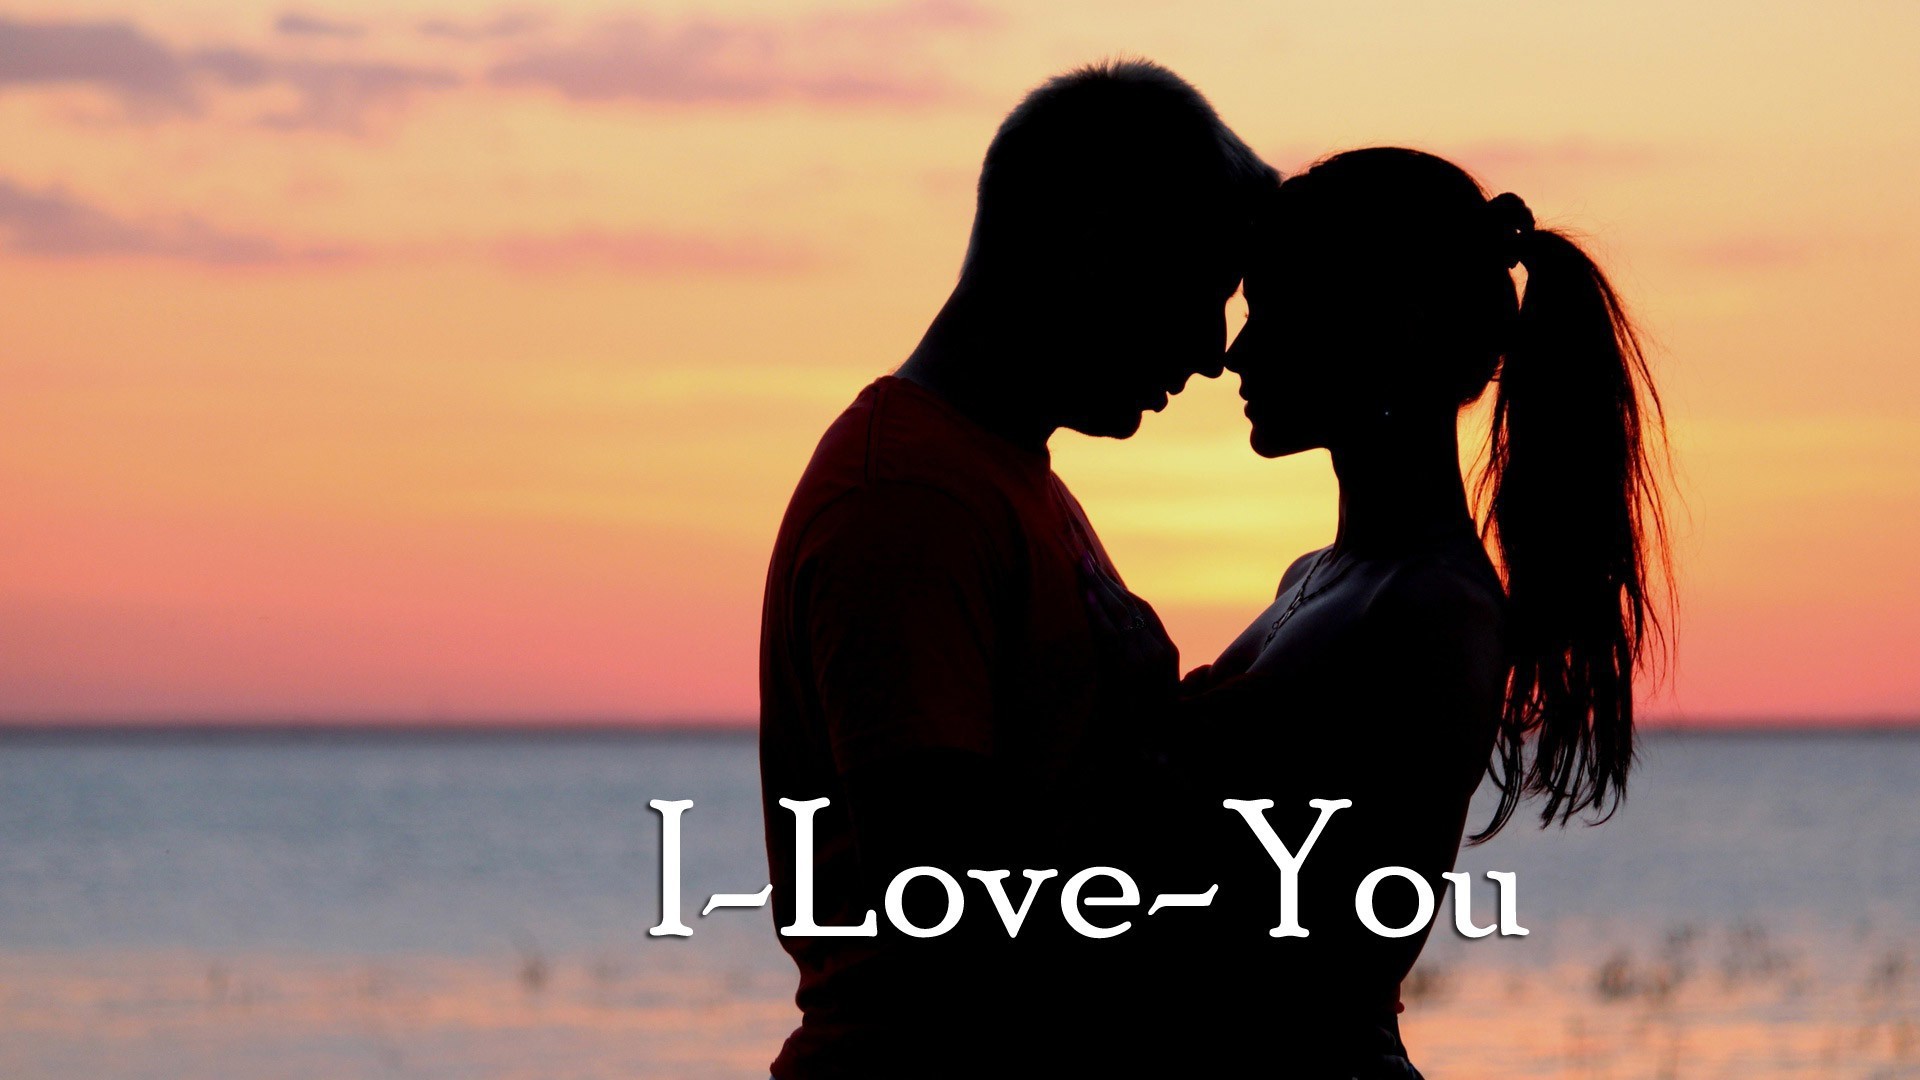 I Love You With Couple Wallpapers 
 Data-src /w/full/3/2/4/93453 - Love You Kiss Images Hd - HD Wallpaper 